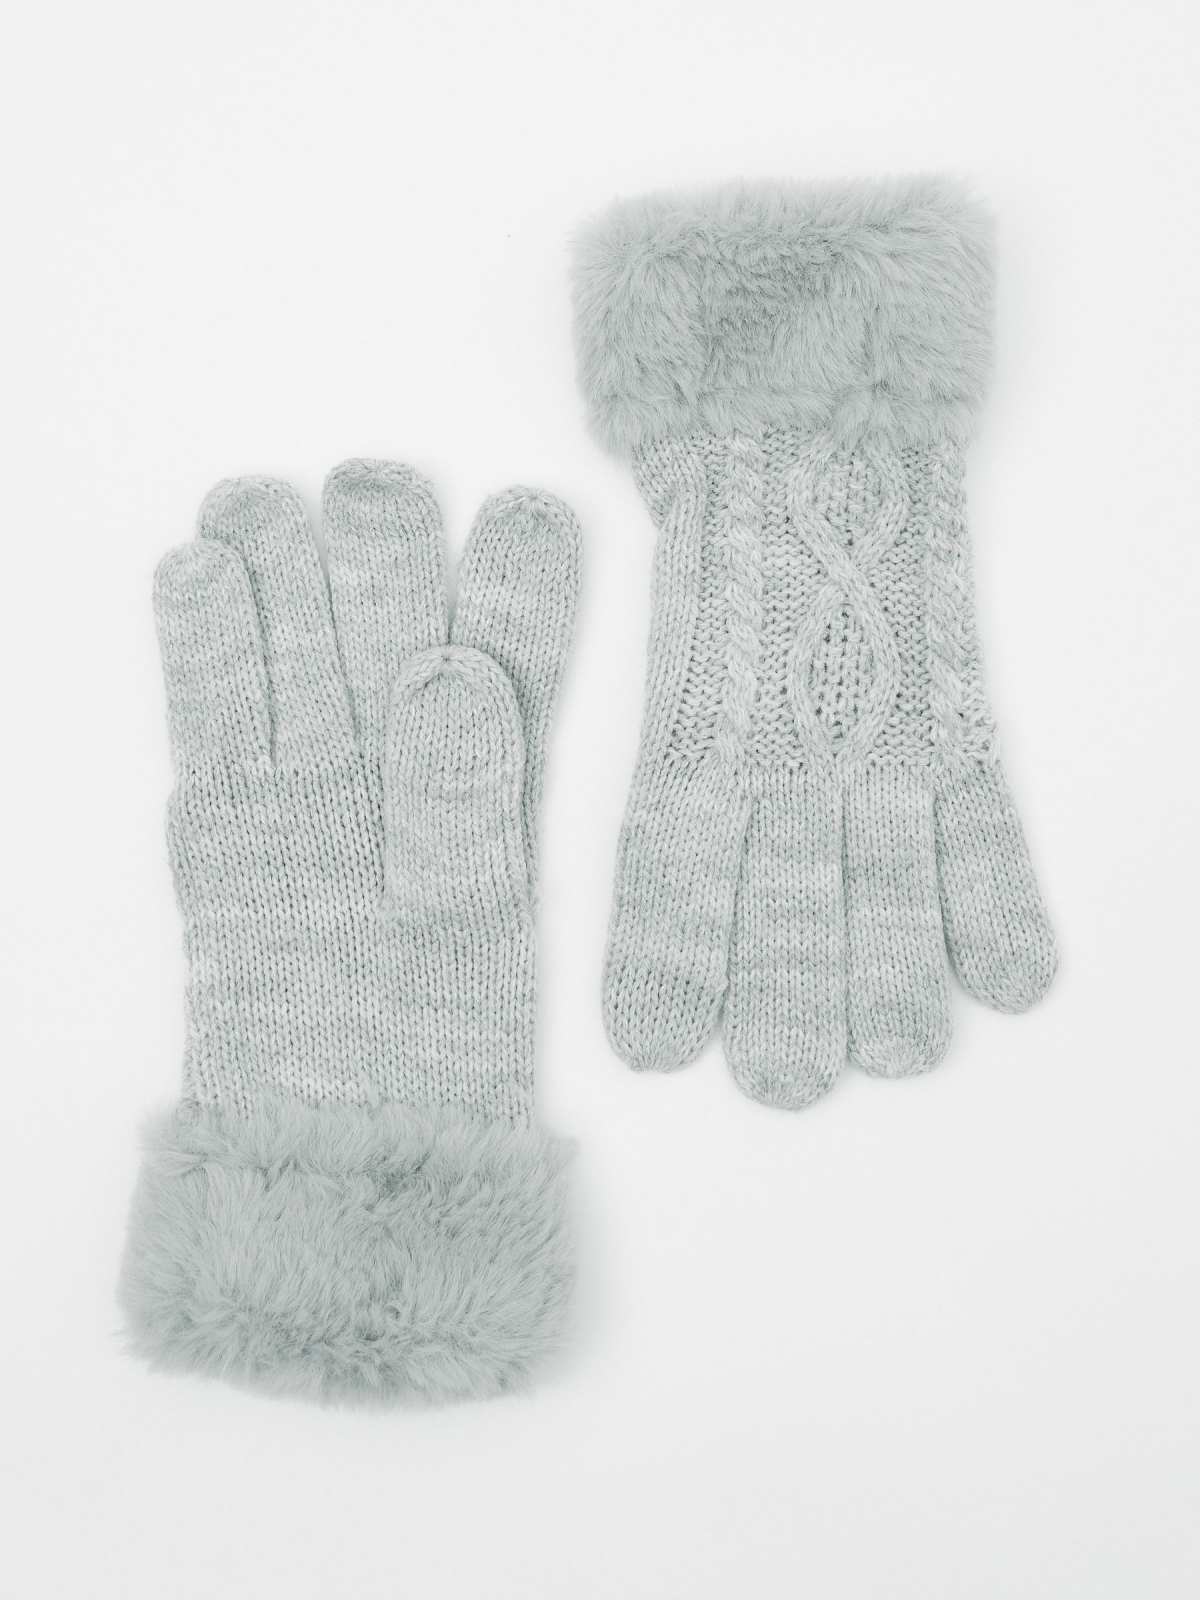 Grey touchscreen gloves grey aerial view